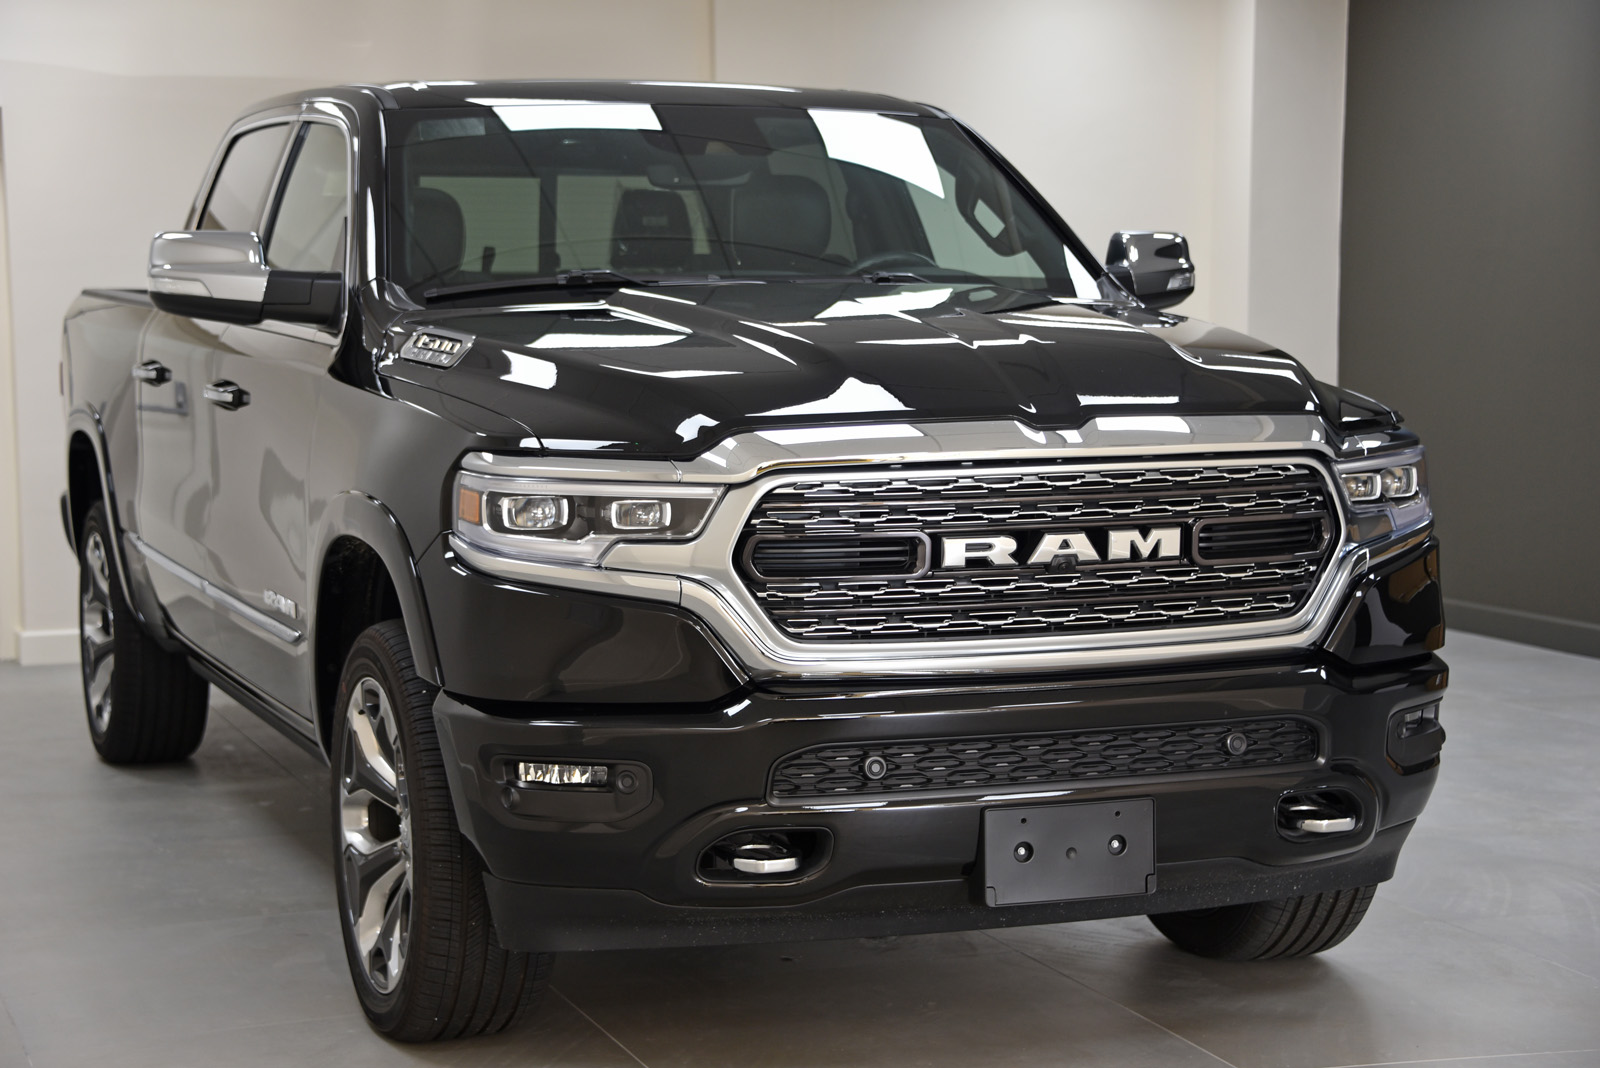 New 2019 RAM Limited in the showroom of David Boatwright